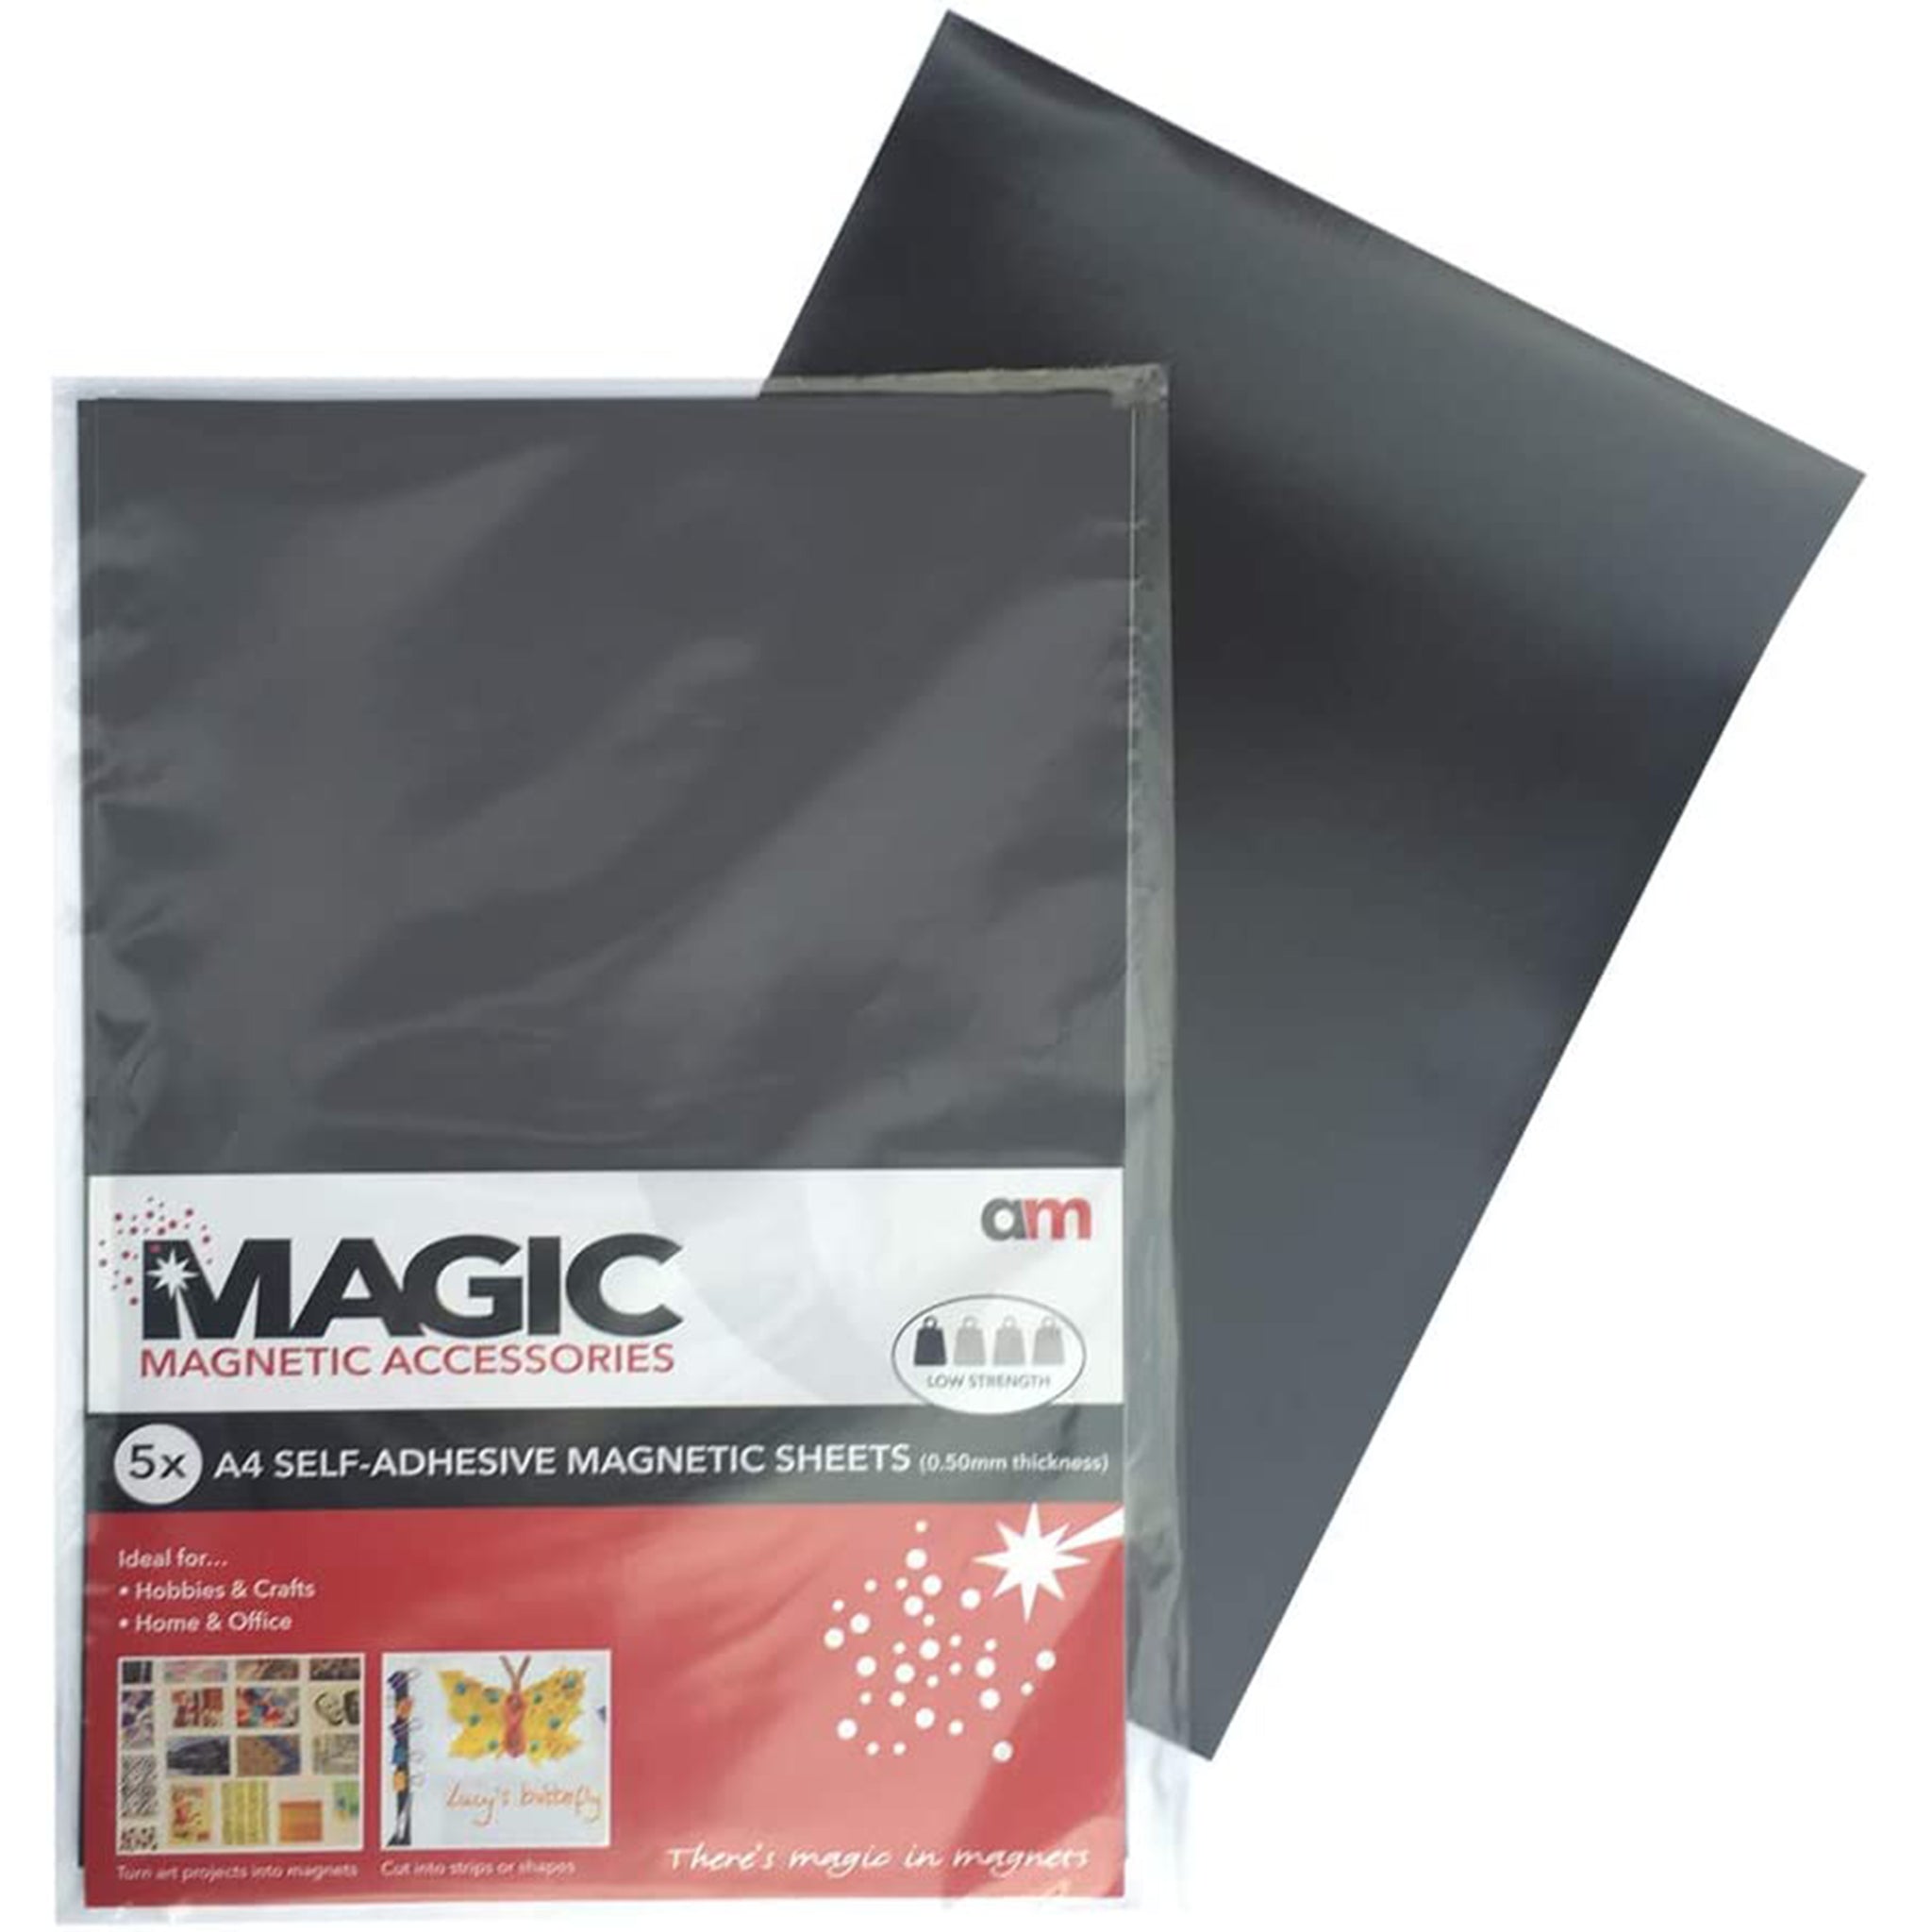 A4 Self Adhesive Magnetic Sheet 0.50mm Pack of 5 Sheets – Anchor Magnets